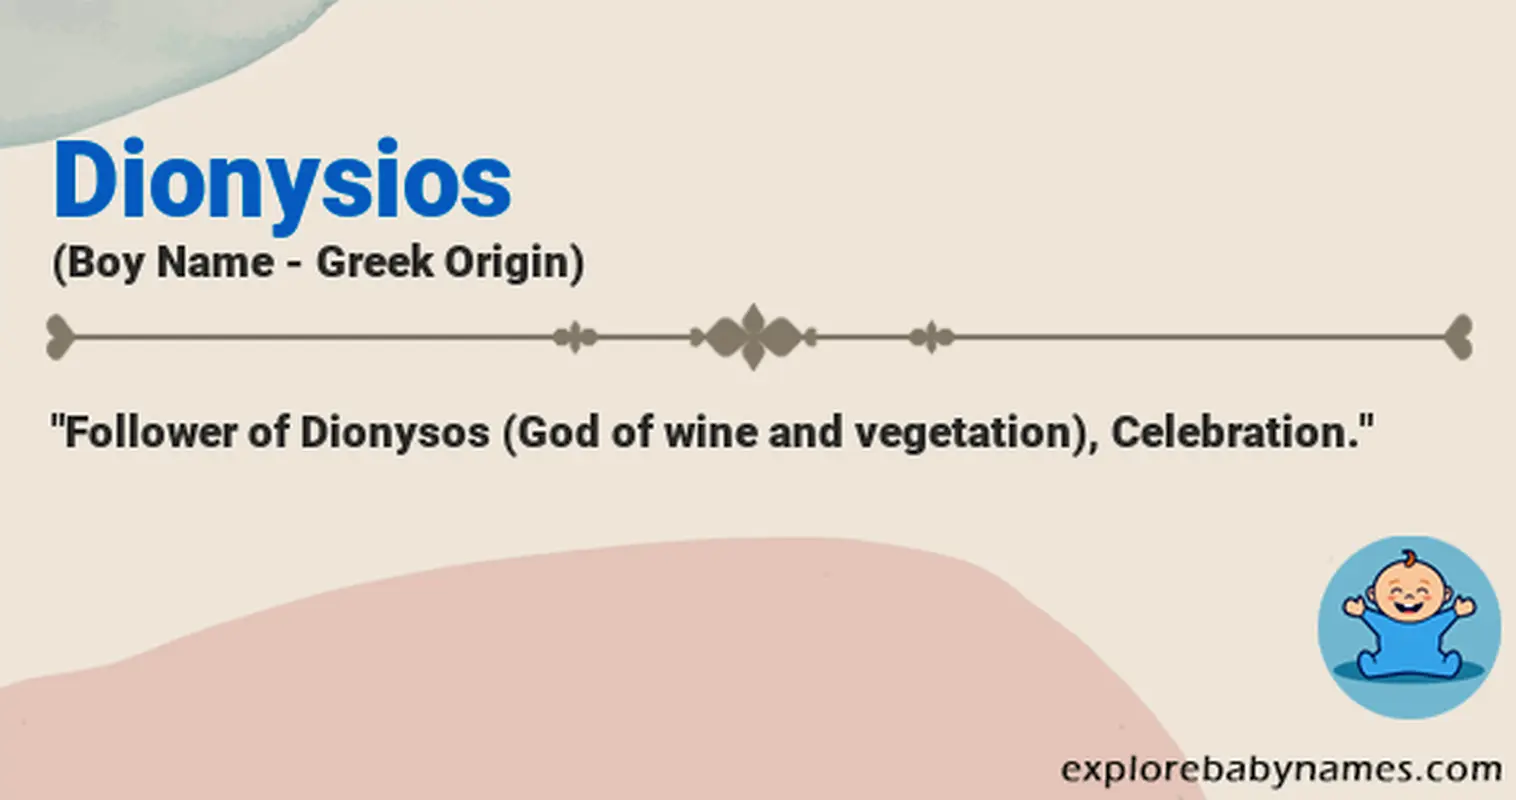 Meaning of Dionysios